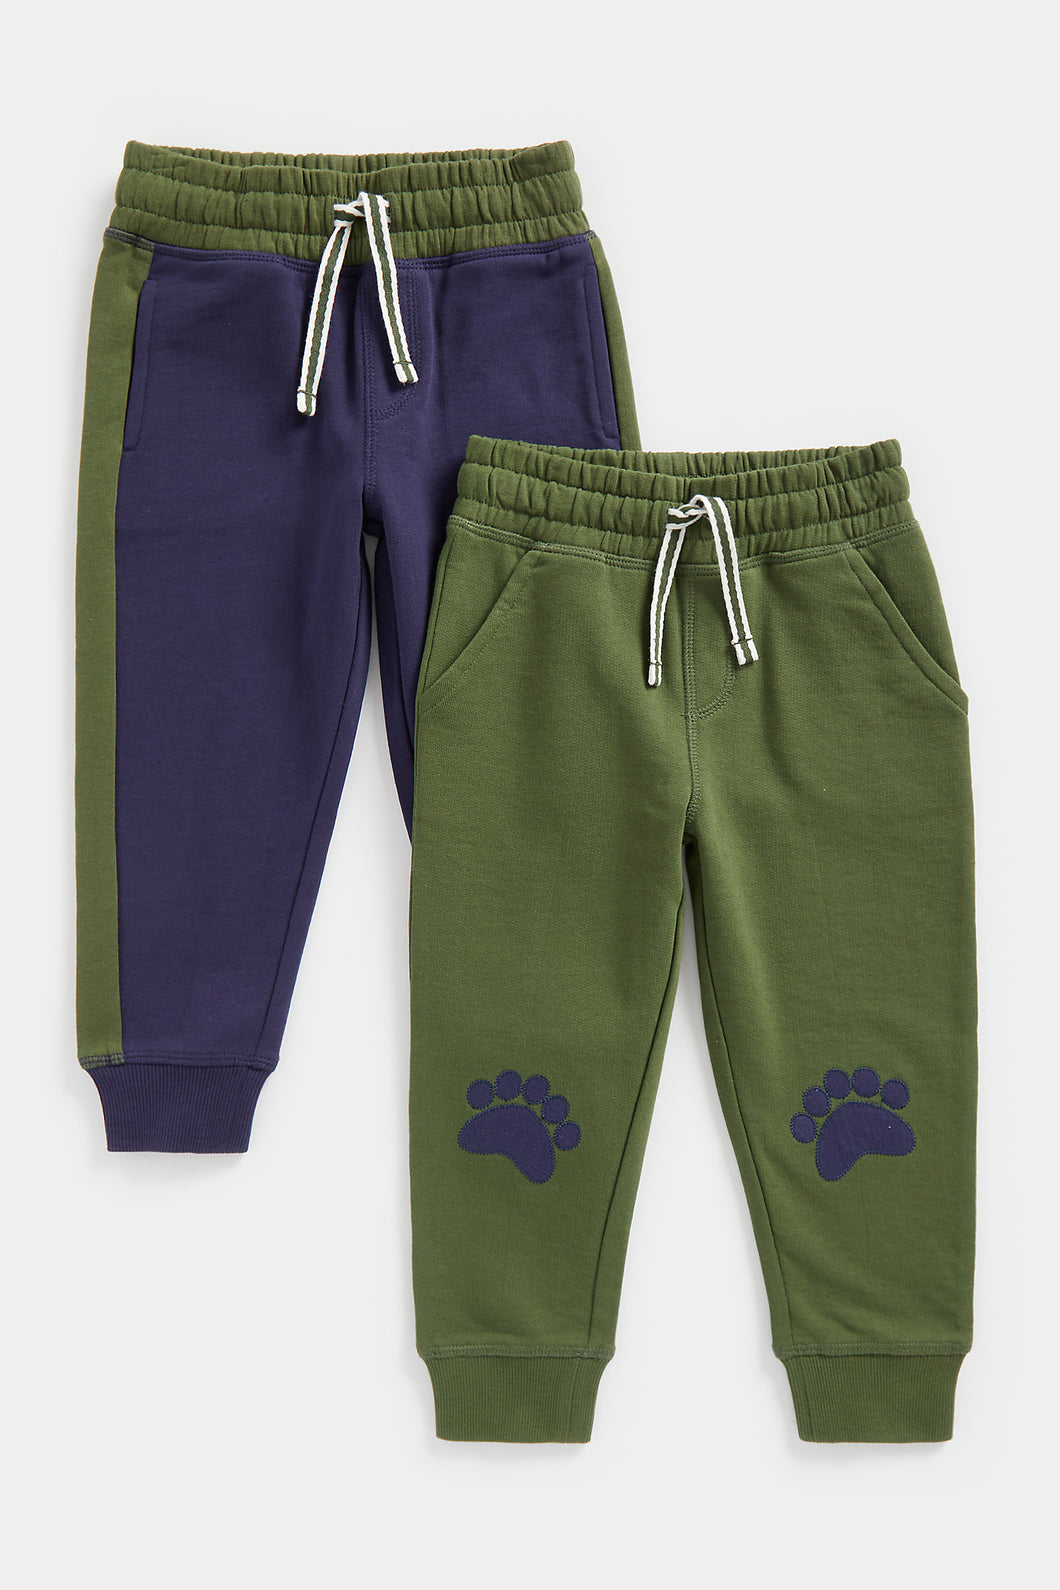 Mothercare Bear Hunt Joggers - 2 Pack